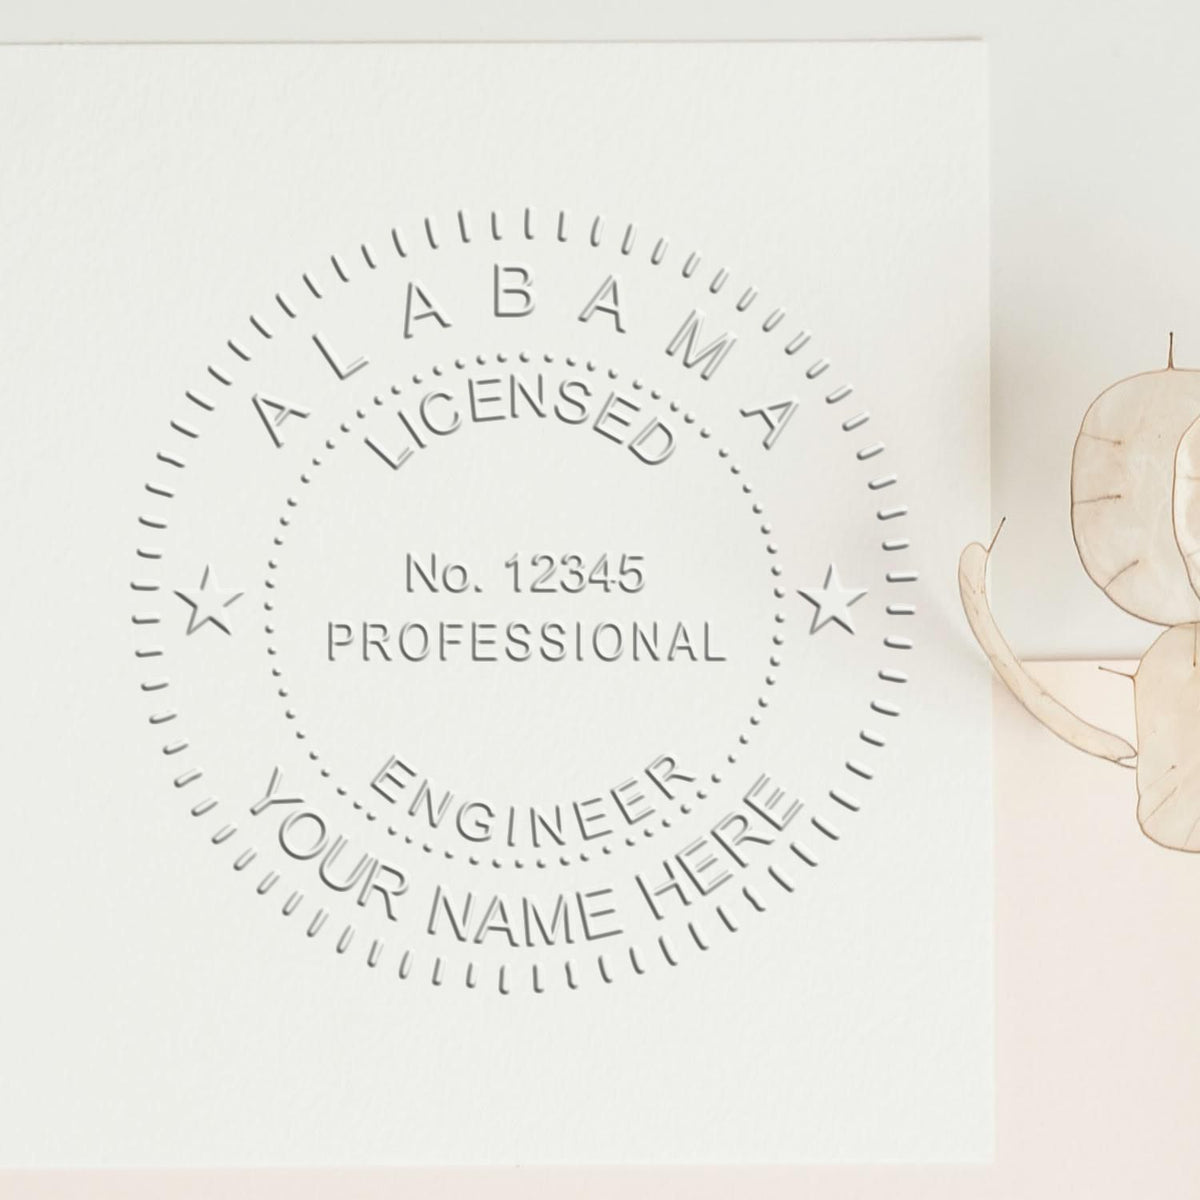 A photograph of the Soft Alabama Professional Engineer Seal stamp impression reveals a vivid, professional image of the on paper.